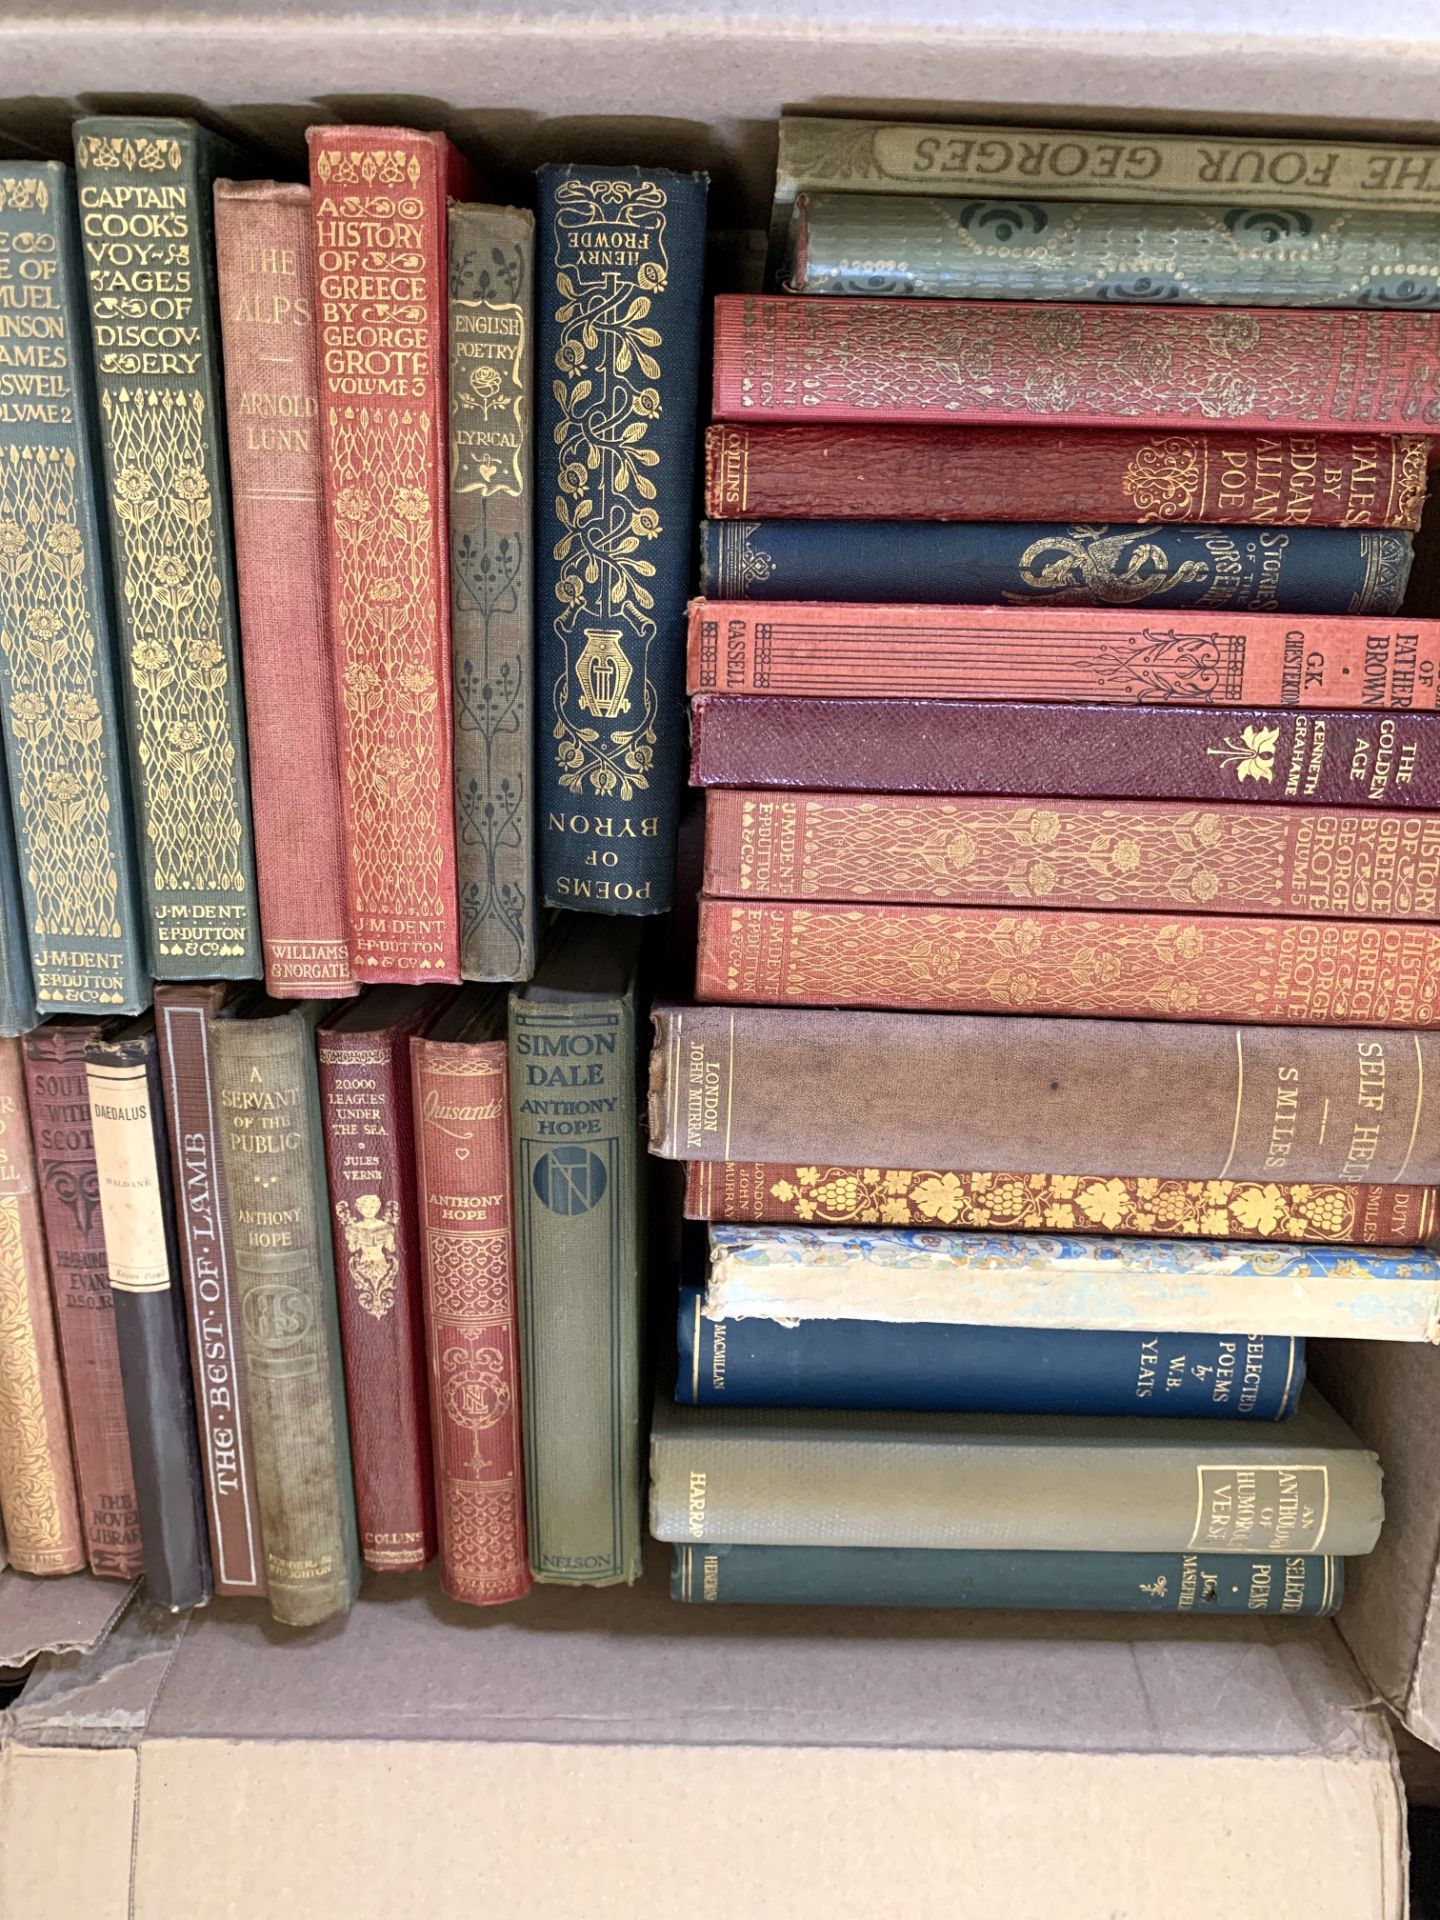 Quantity of various books including poetry and history.